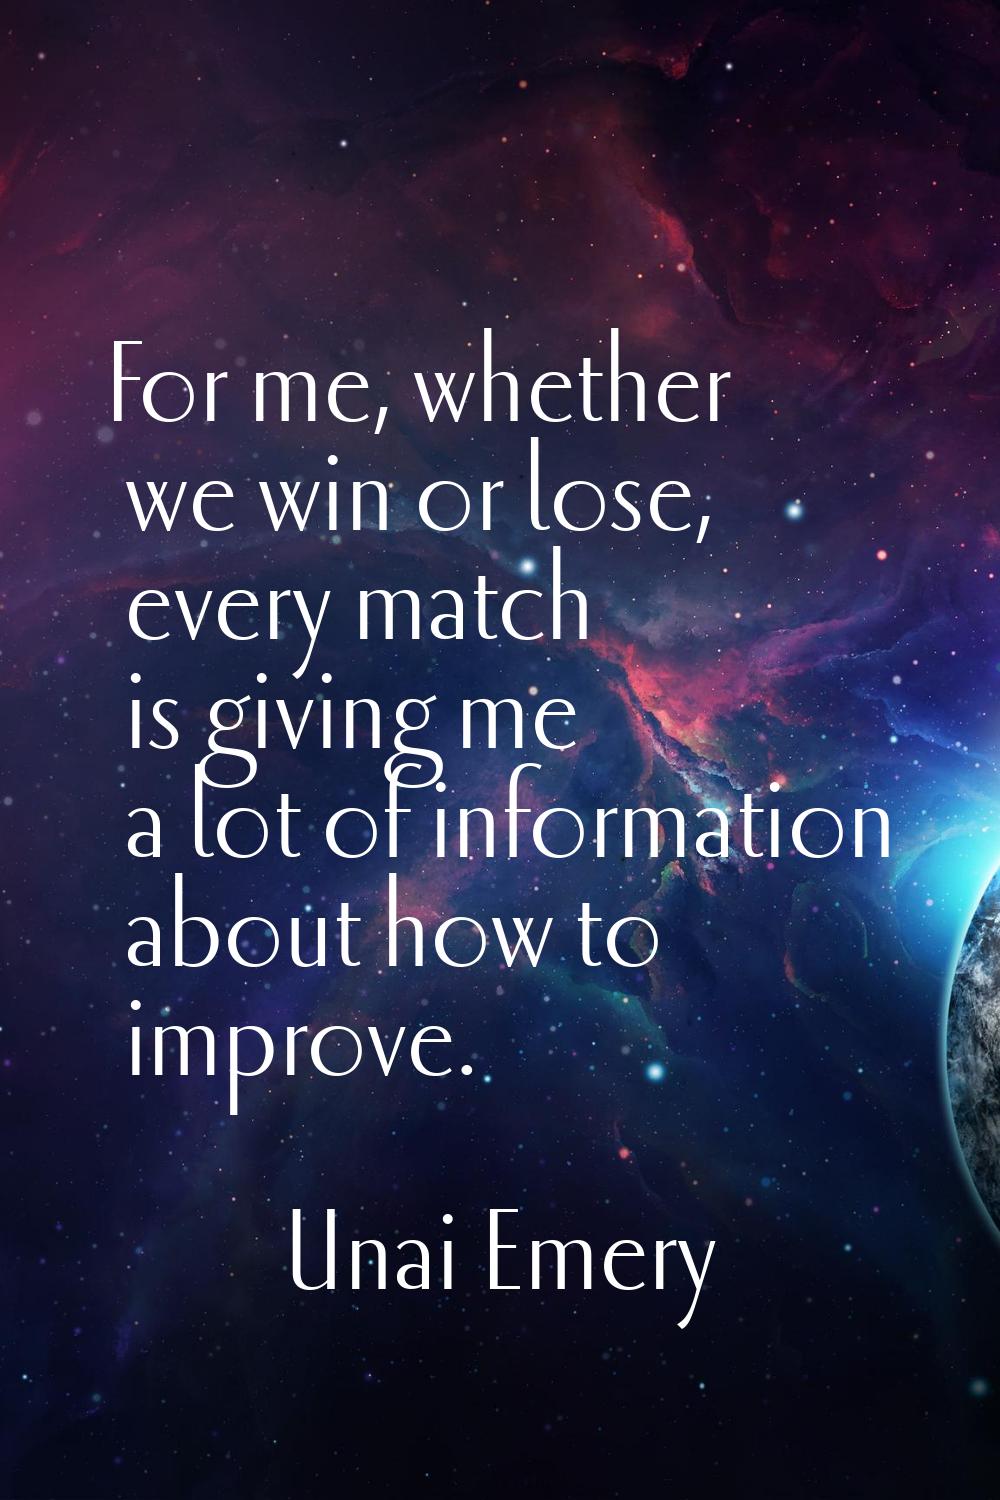 For me, whether we win or lose, every match is giving me a lot of information about how to improve.